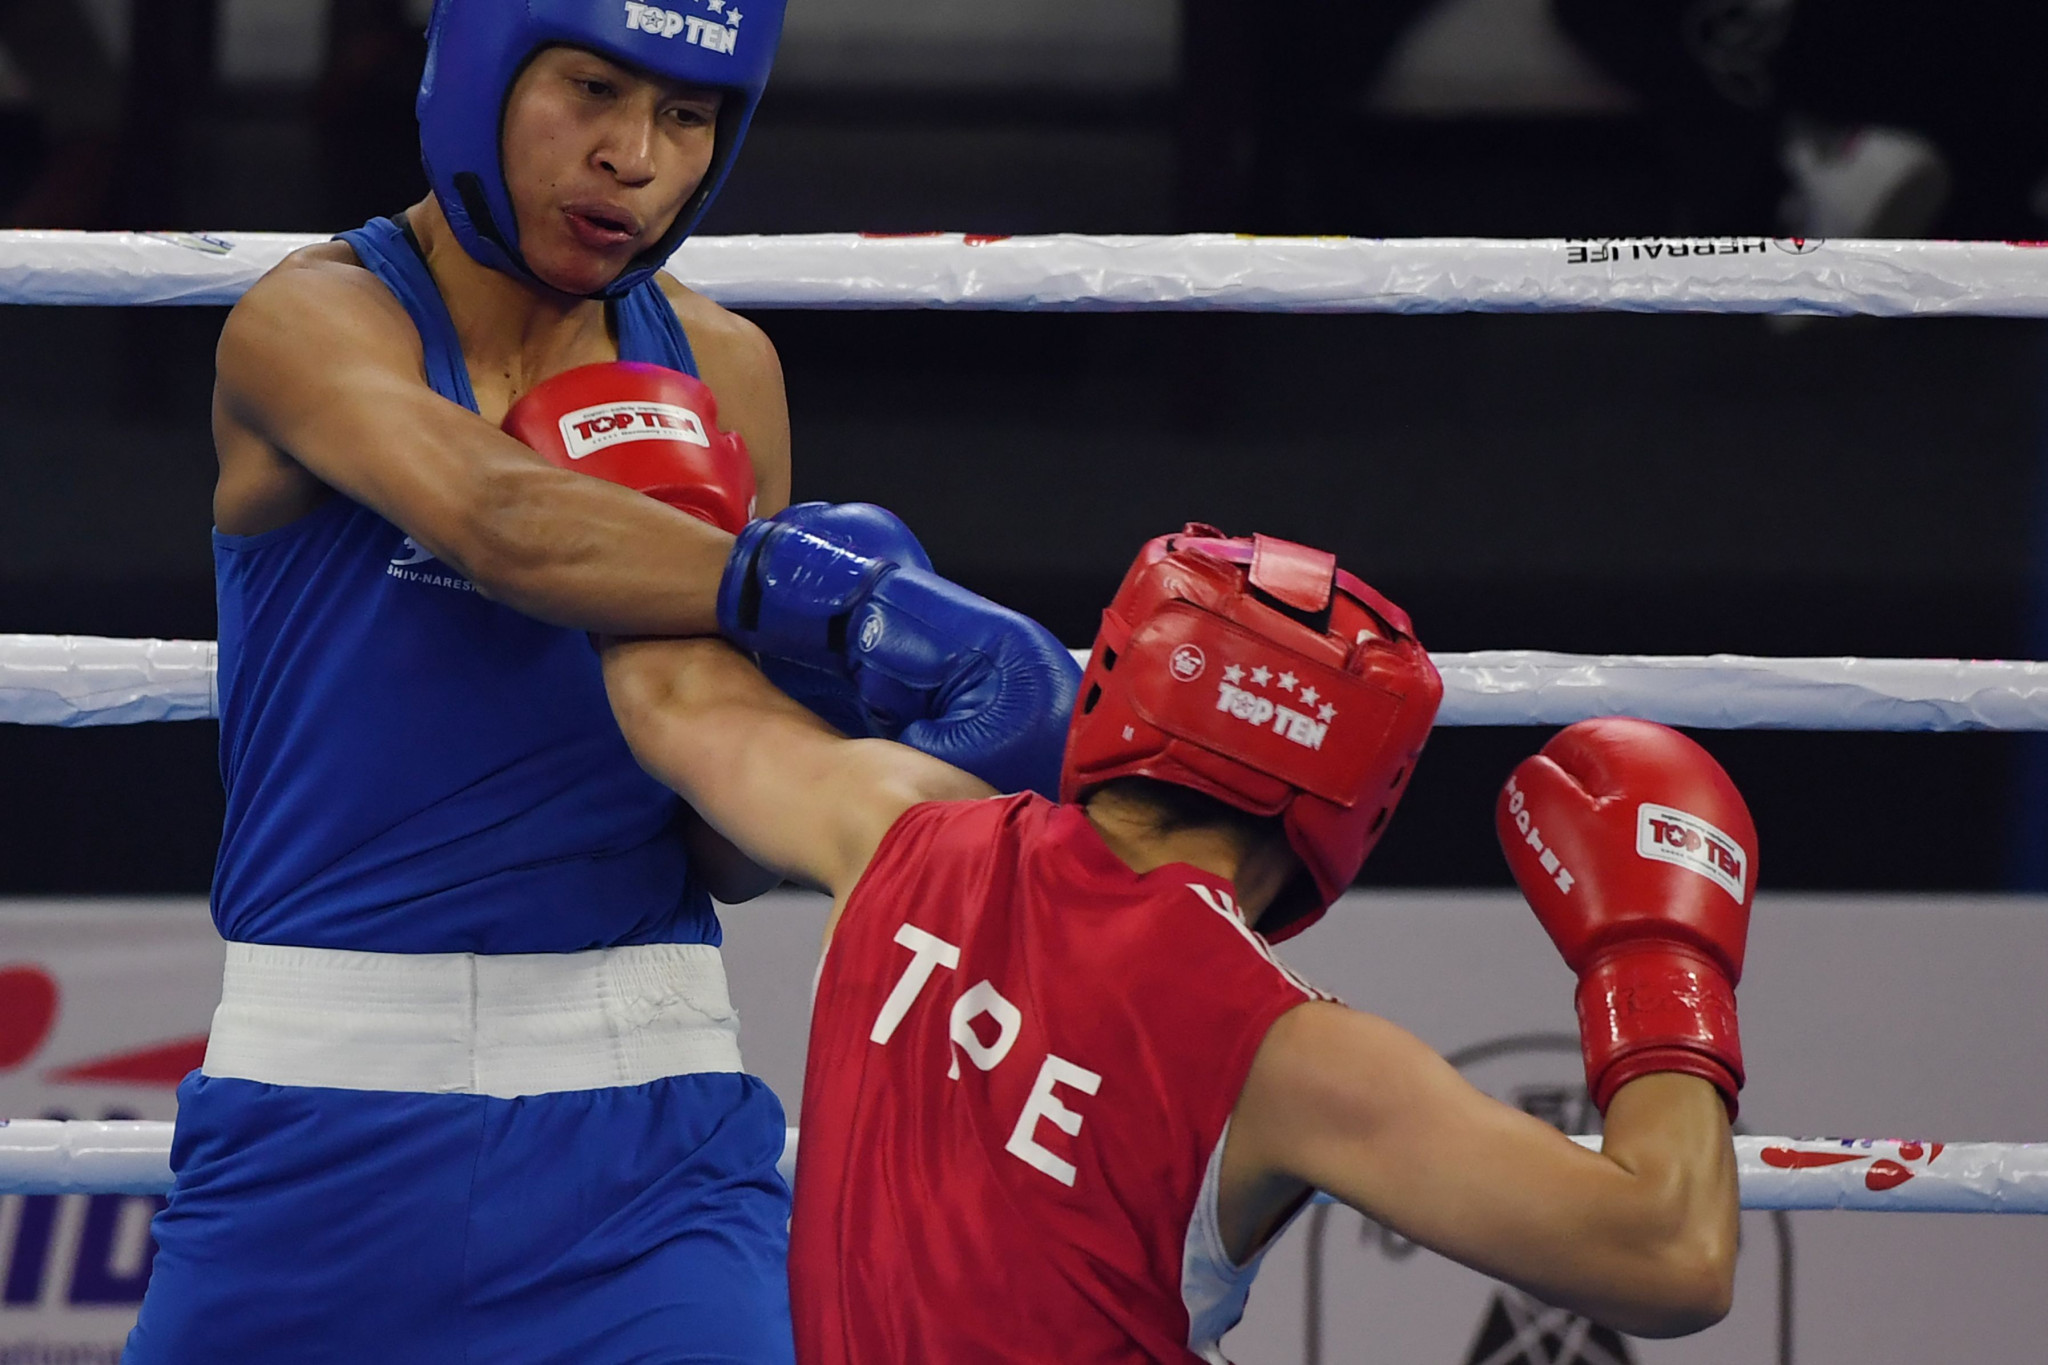 Indian trio secure Tokyo 2020 berths at Asia-Oceania Olympic boxing qualifier